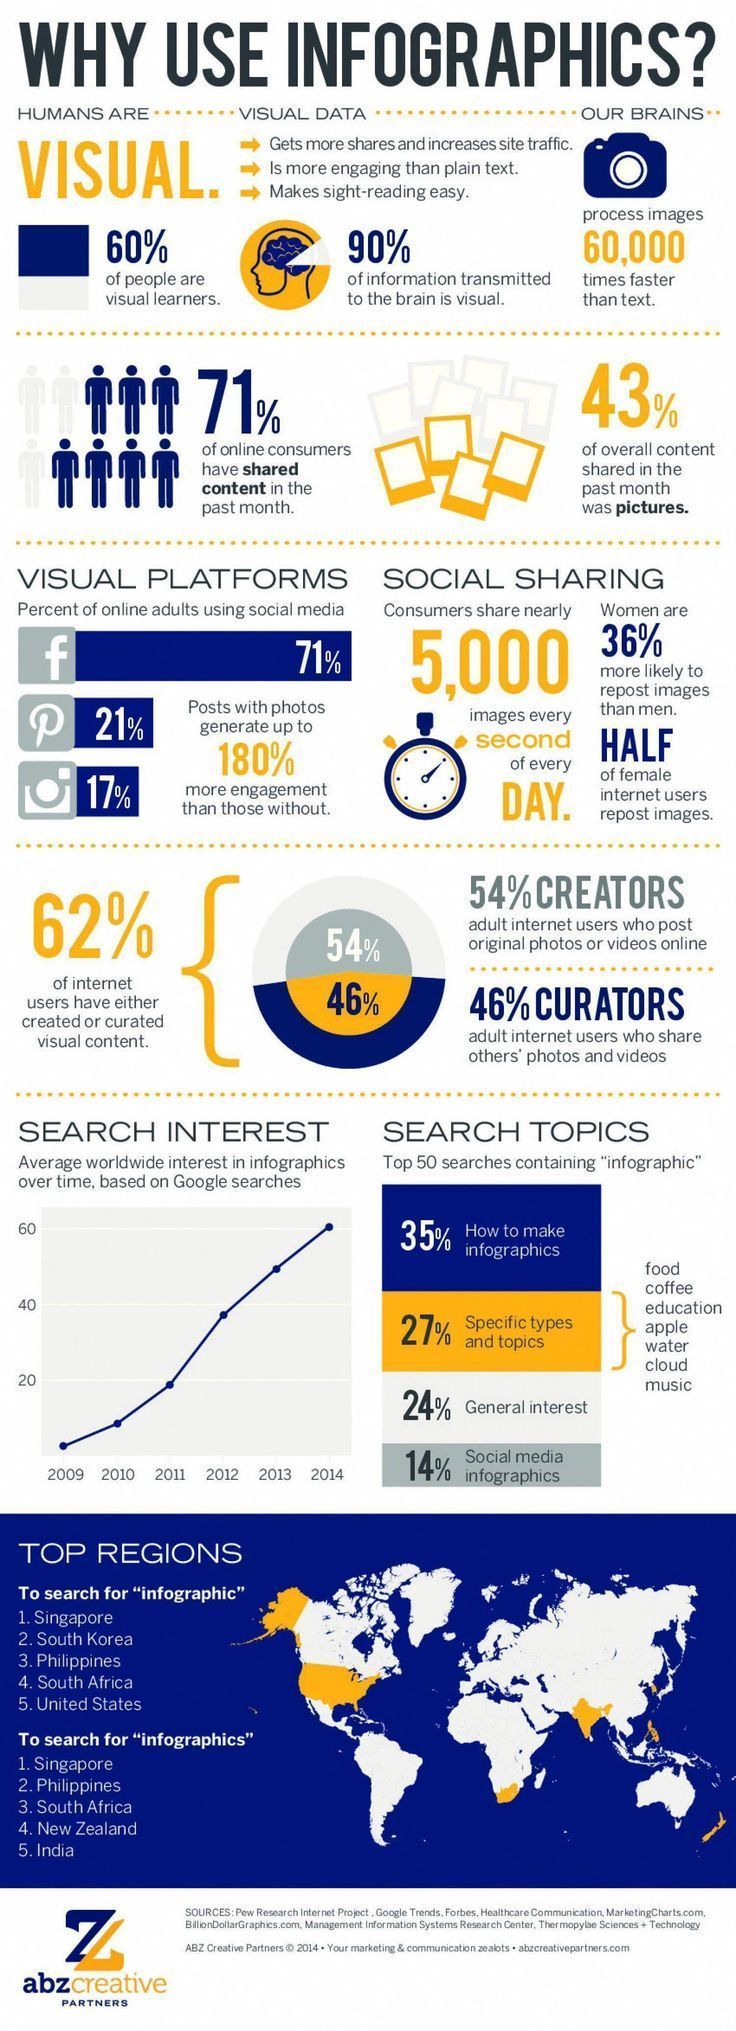 40 Complex Topics Explained Perfectly By Infographics  Learn | Infographic, Infographic ...